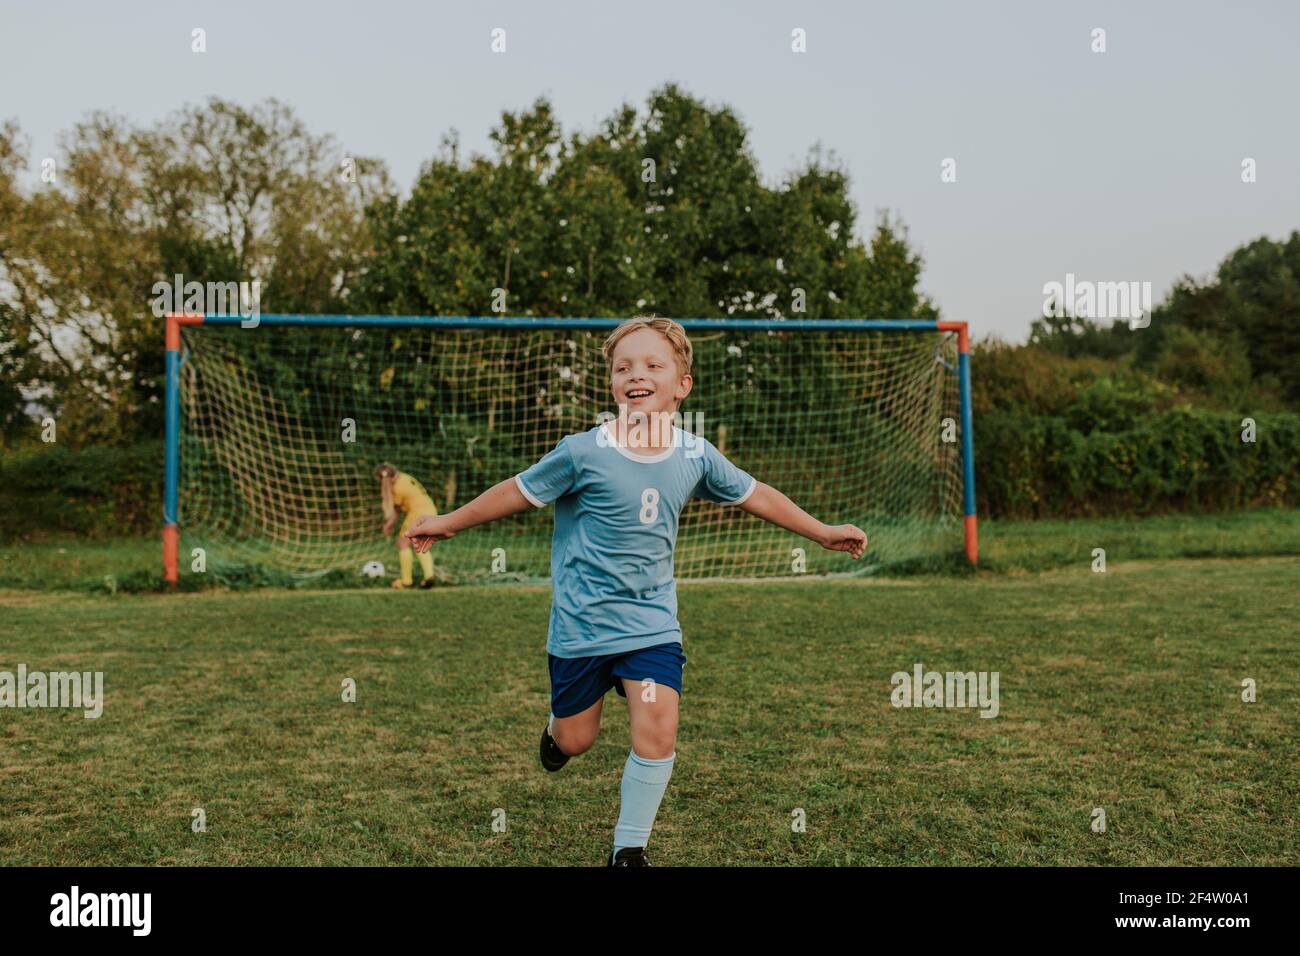 Children playing football outside on pitch. Full length of happy boy scoring goal during amateur soccer game. Stock Photo